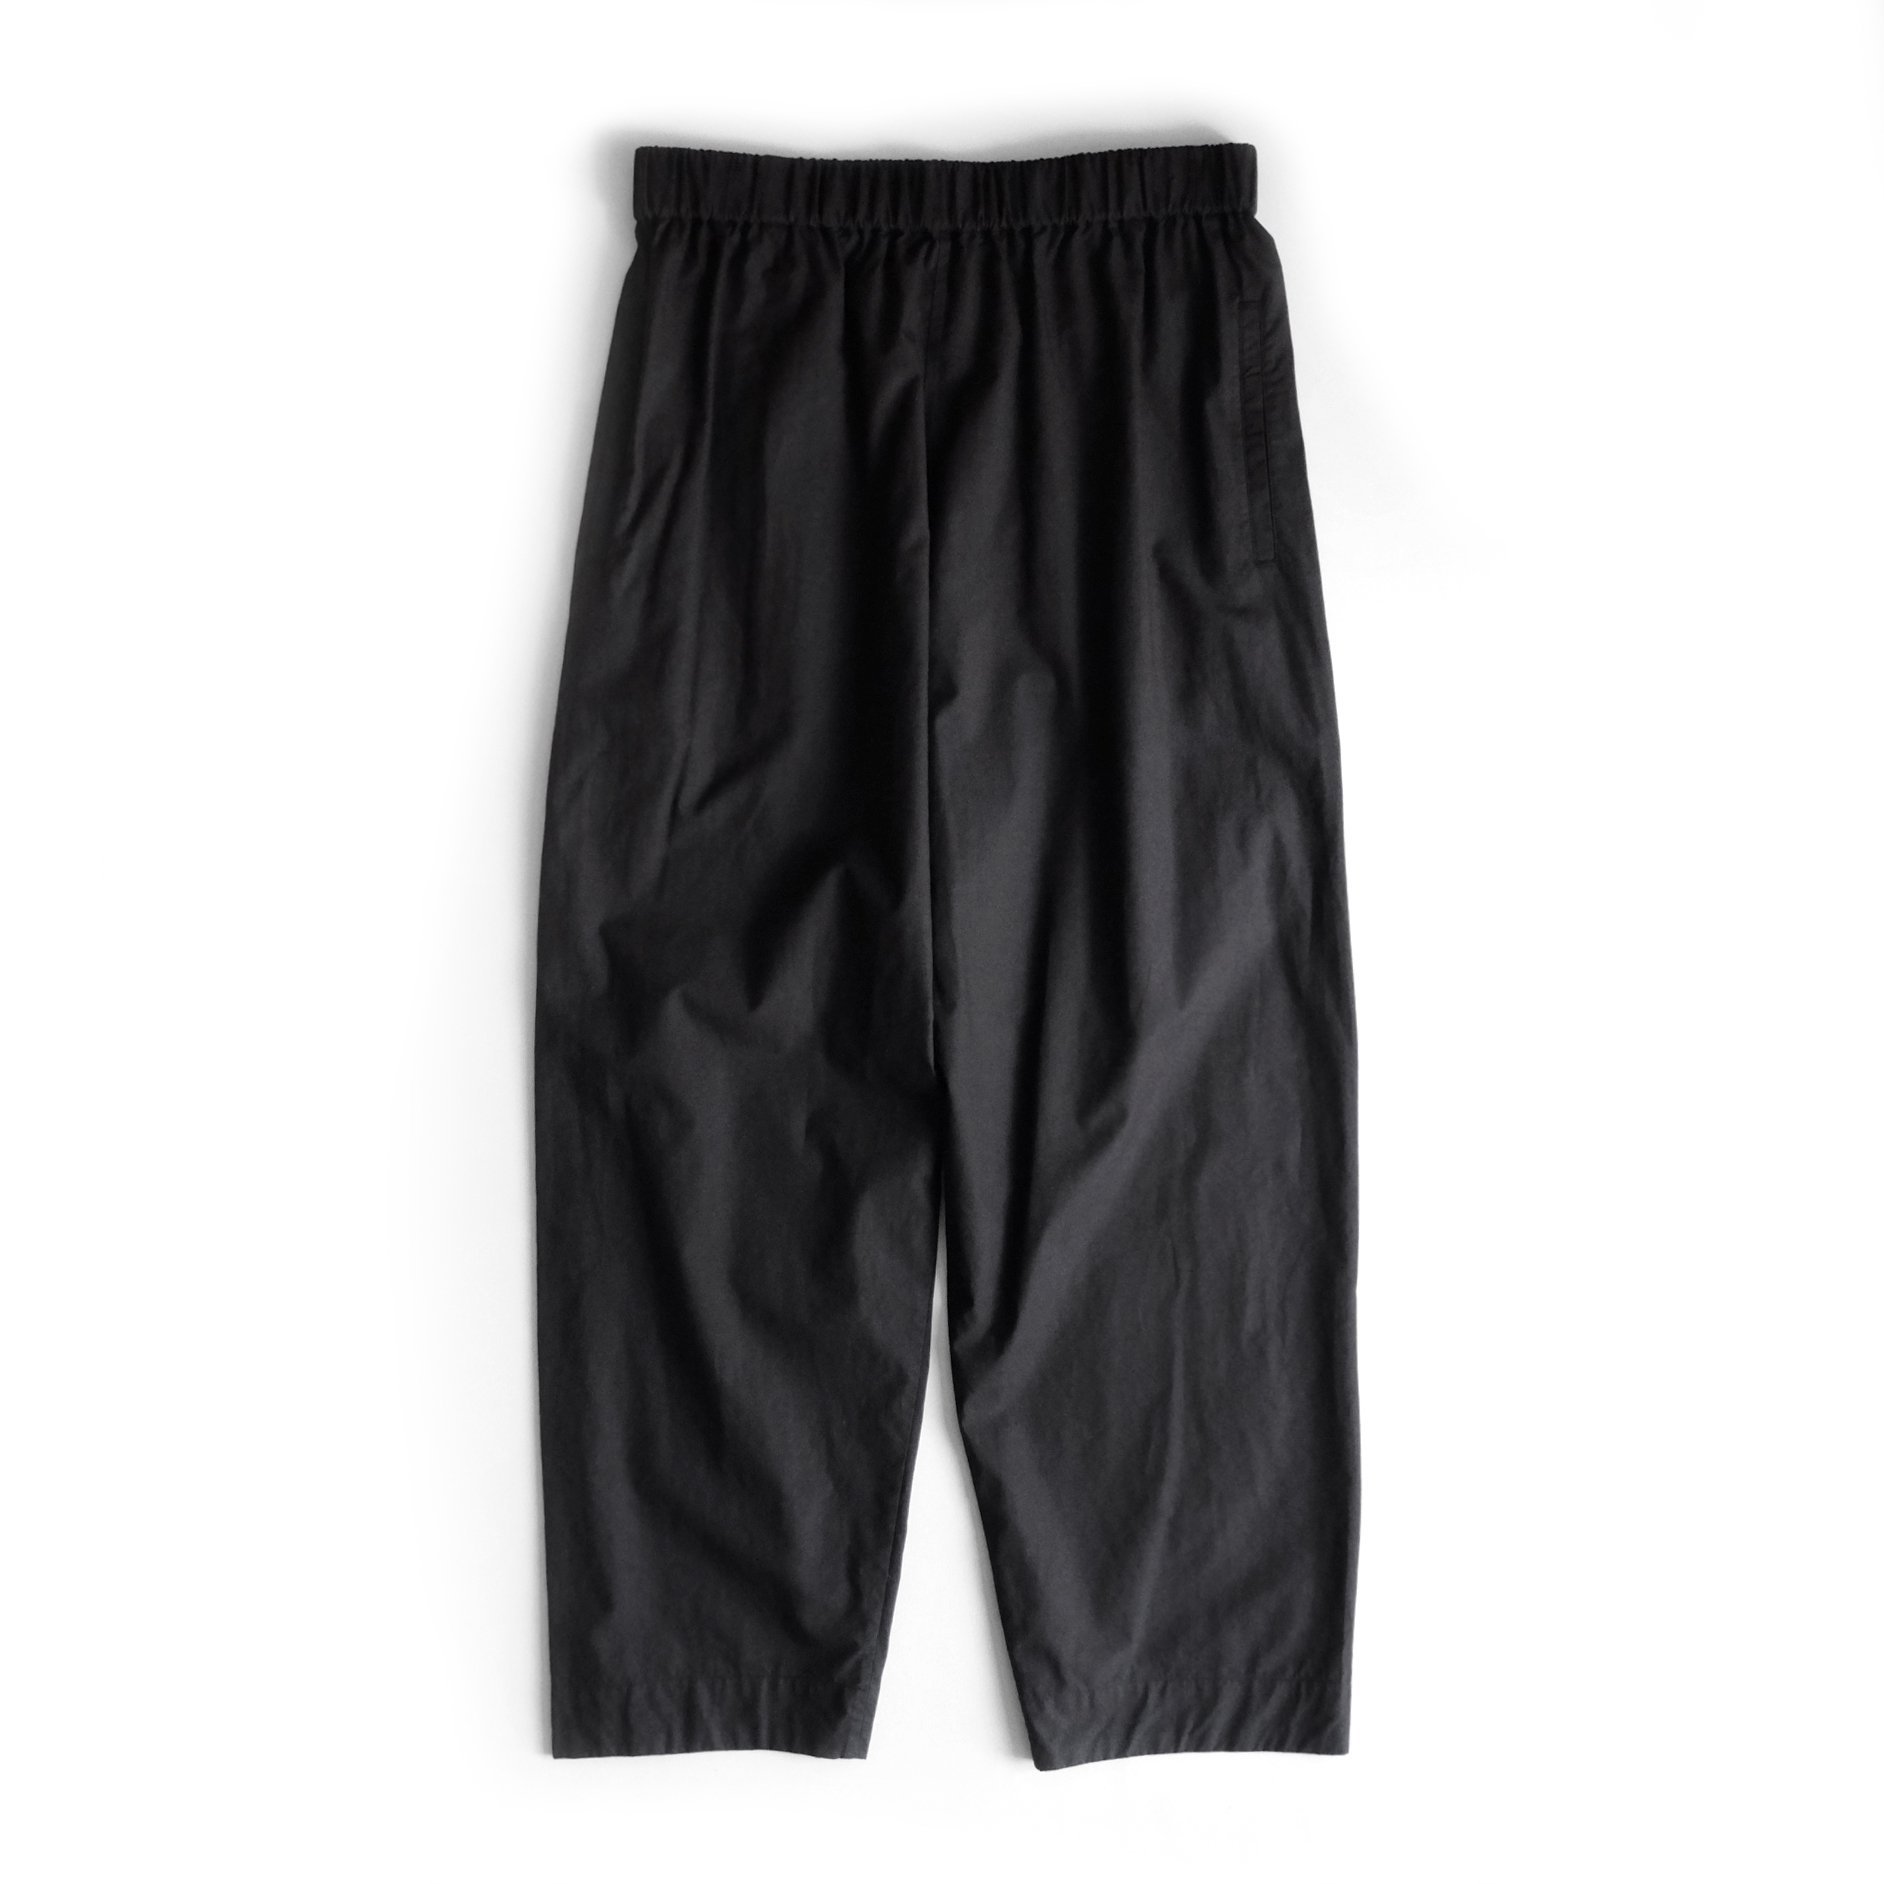 ARTS & SCIENCE / New easy pants【No.0231L31400056】 - くるみの木